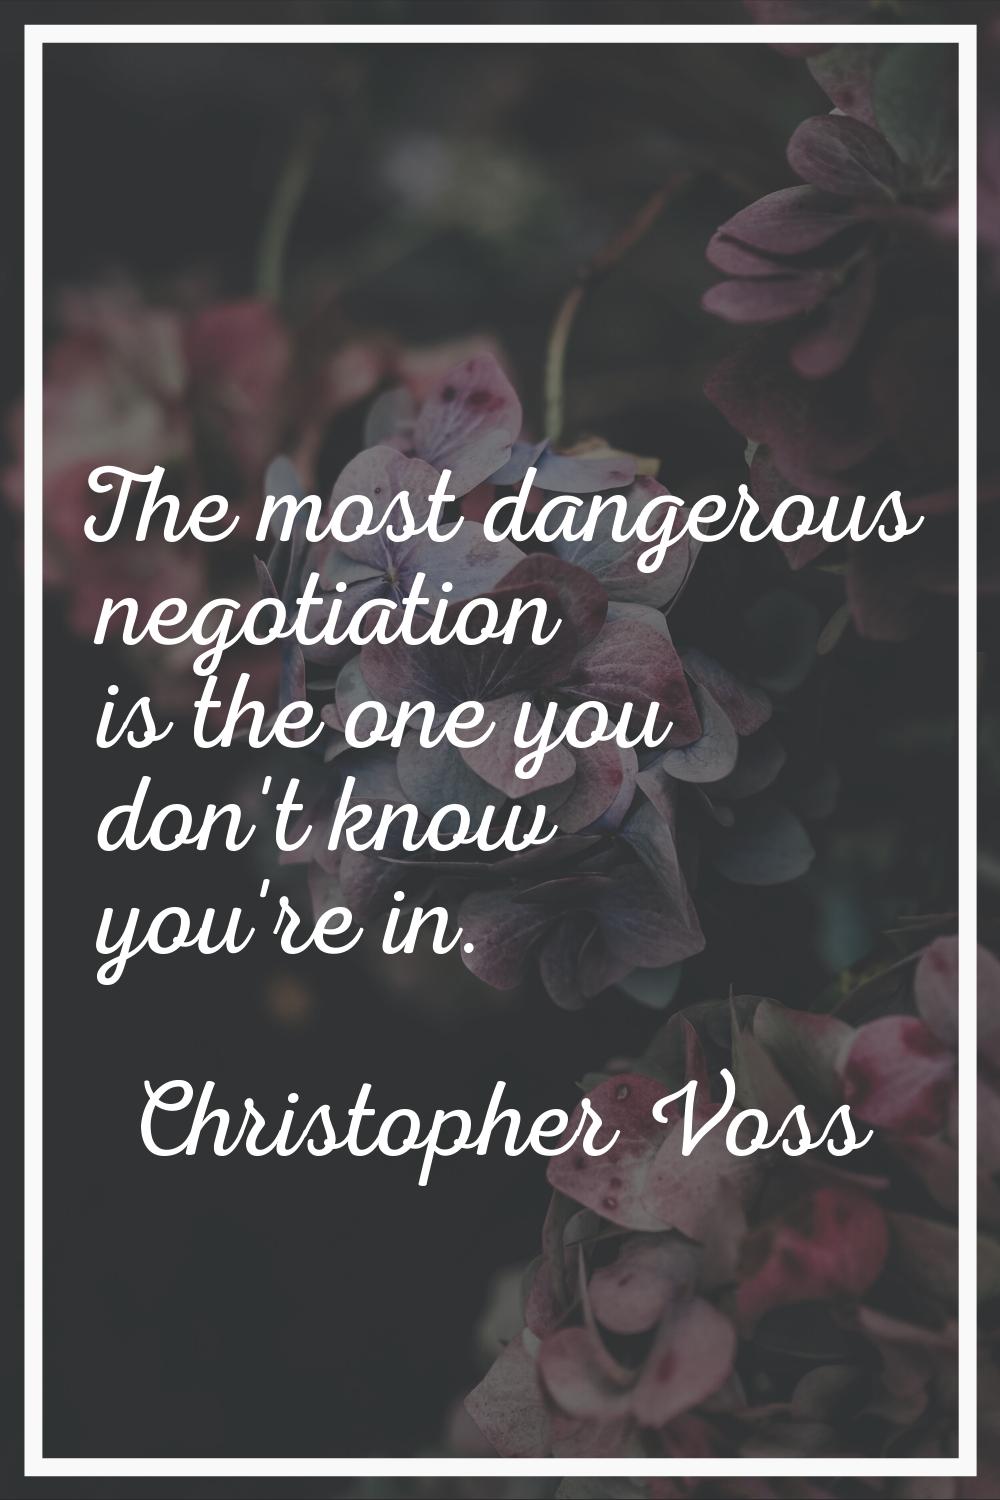 The most dangerous negotiation is the one you don't know you're in.